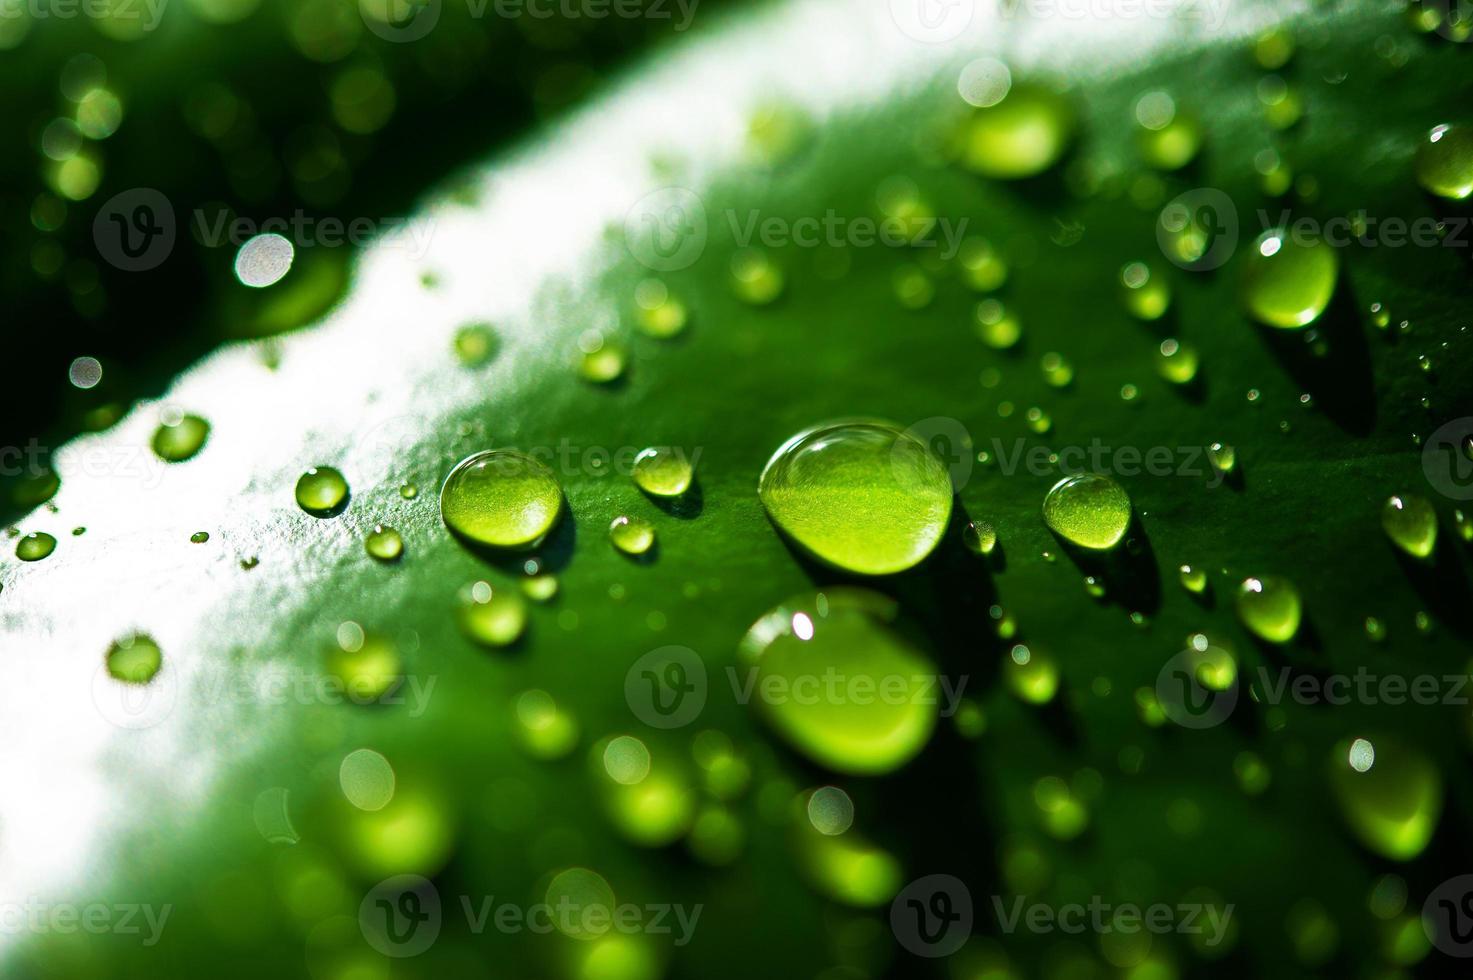 The dew drops on the leaves are not green photo